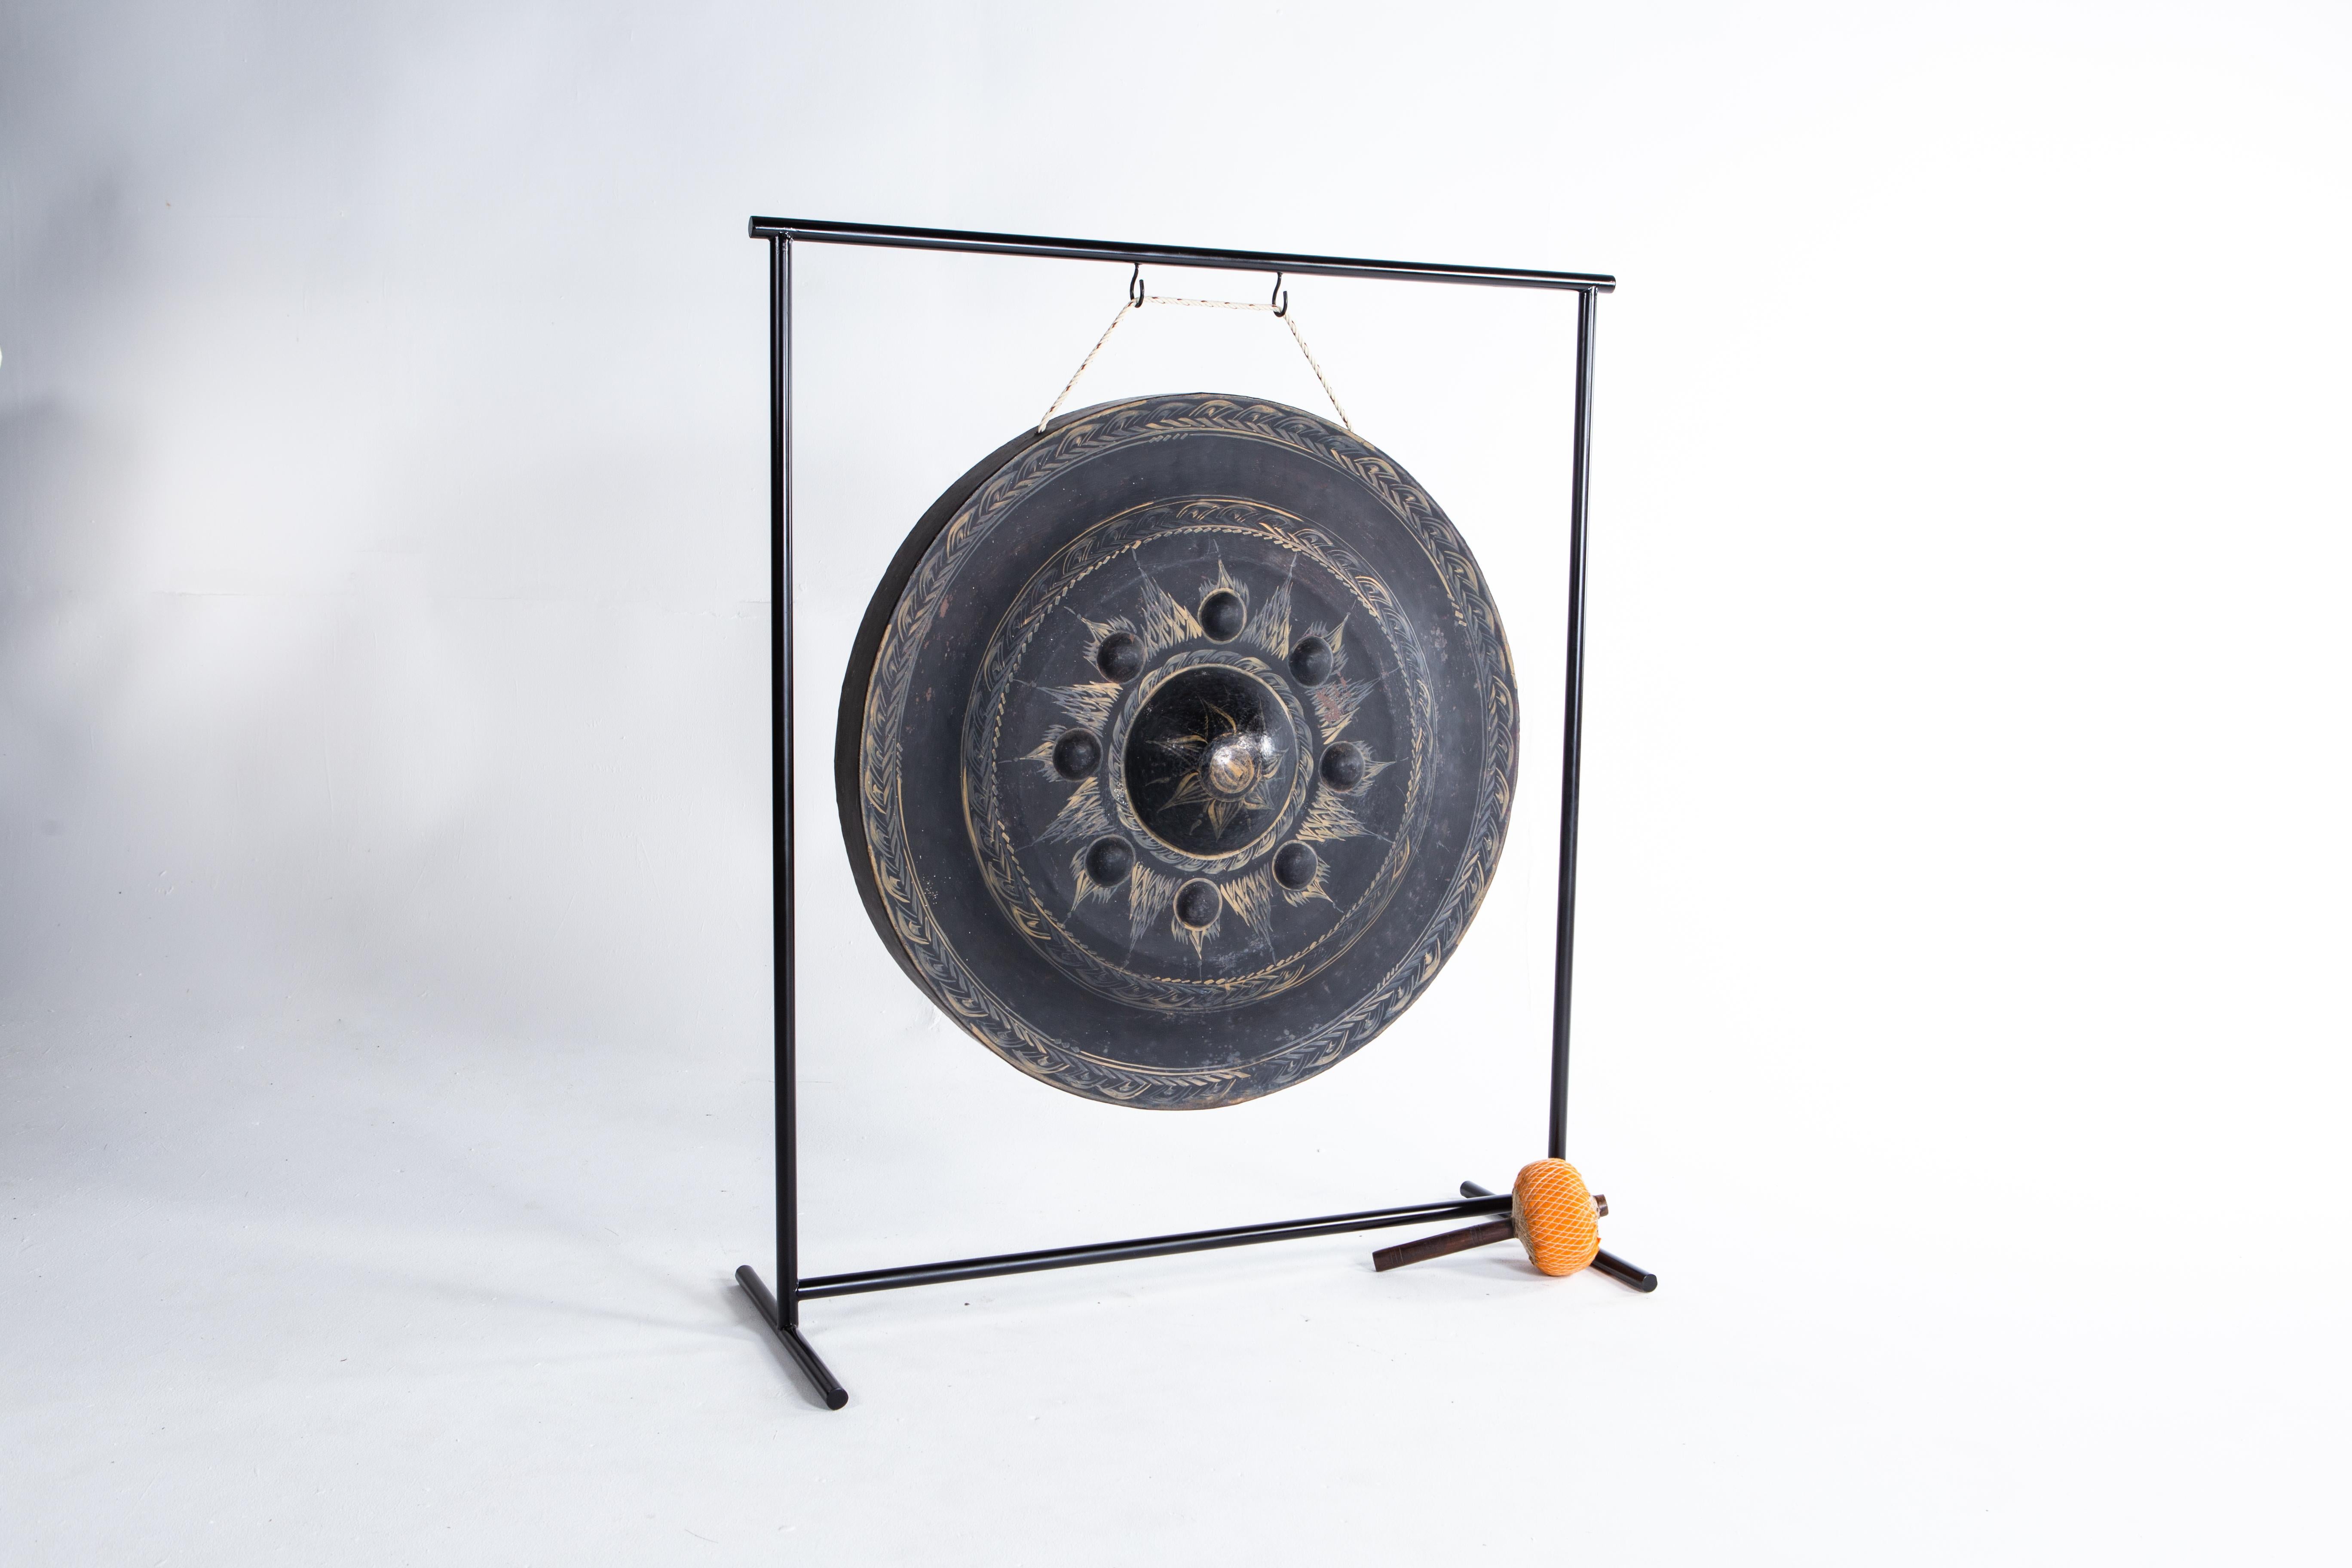 This metal gong was once given to a temple to gain merit for the giver. According to Buddhist belief, meritorious gifts help one achieve a higher reincarnation. So many gongs are given to temples that monks often trade them for other articles.